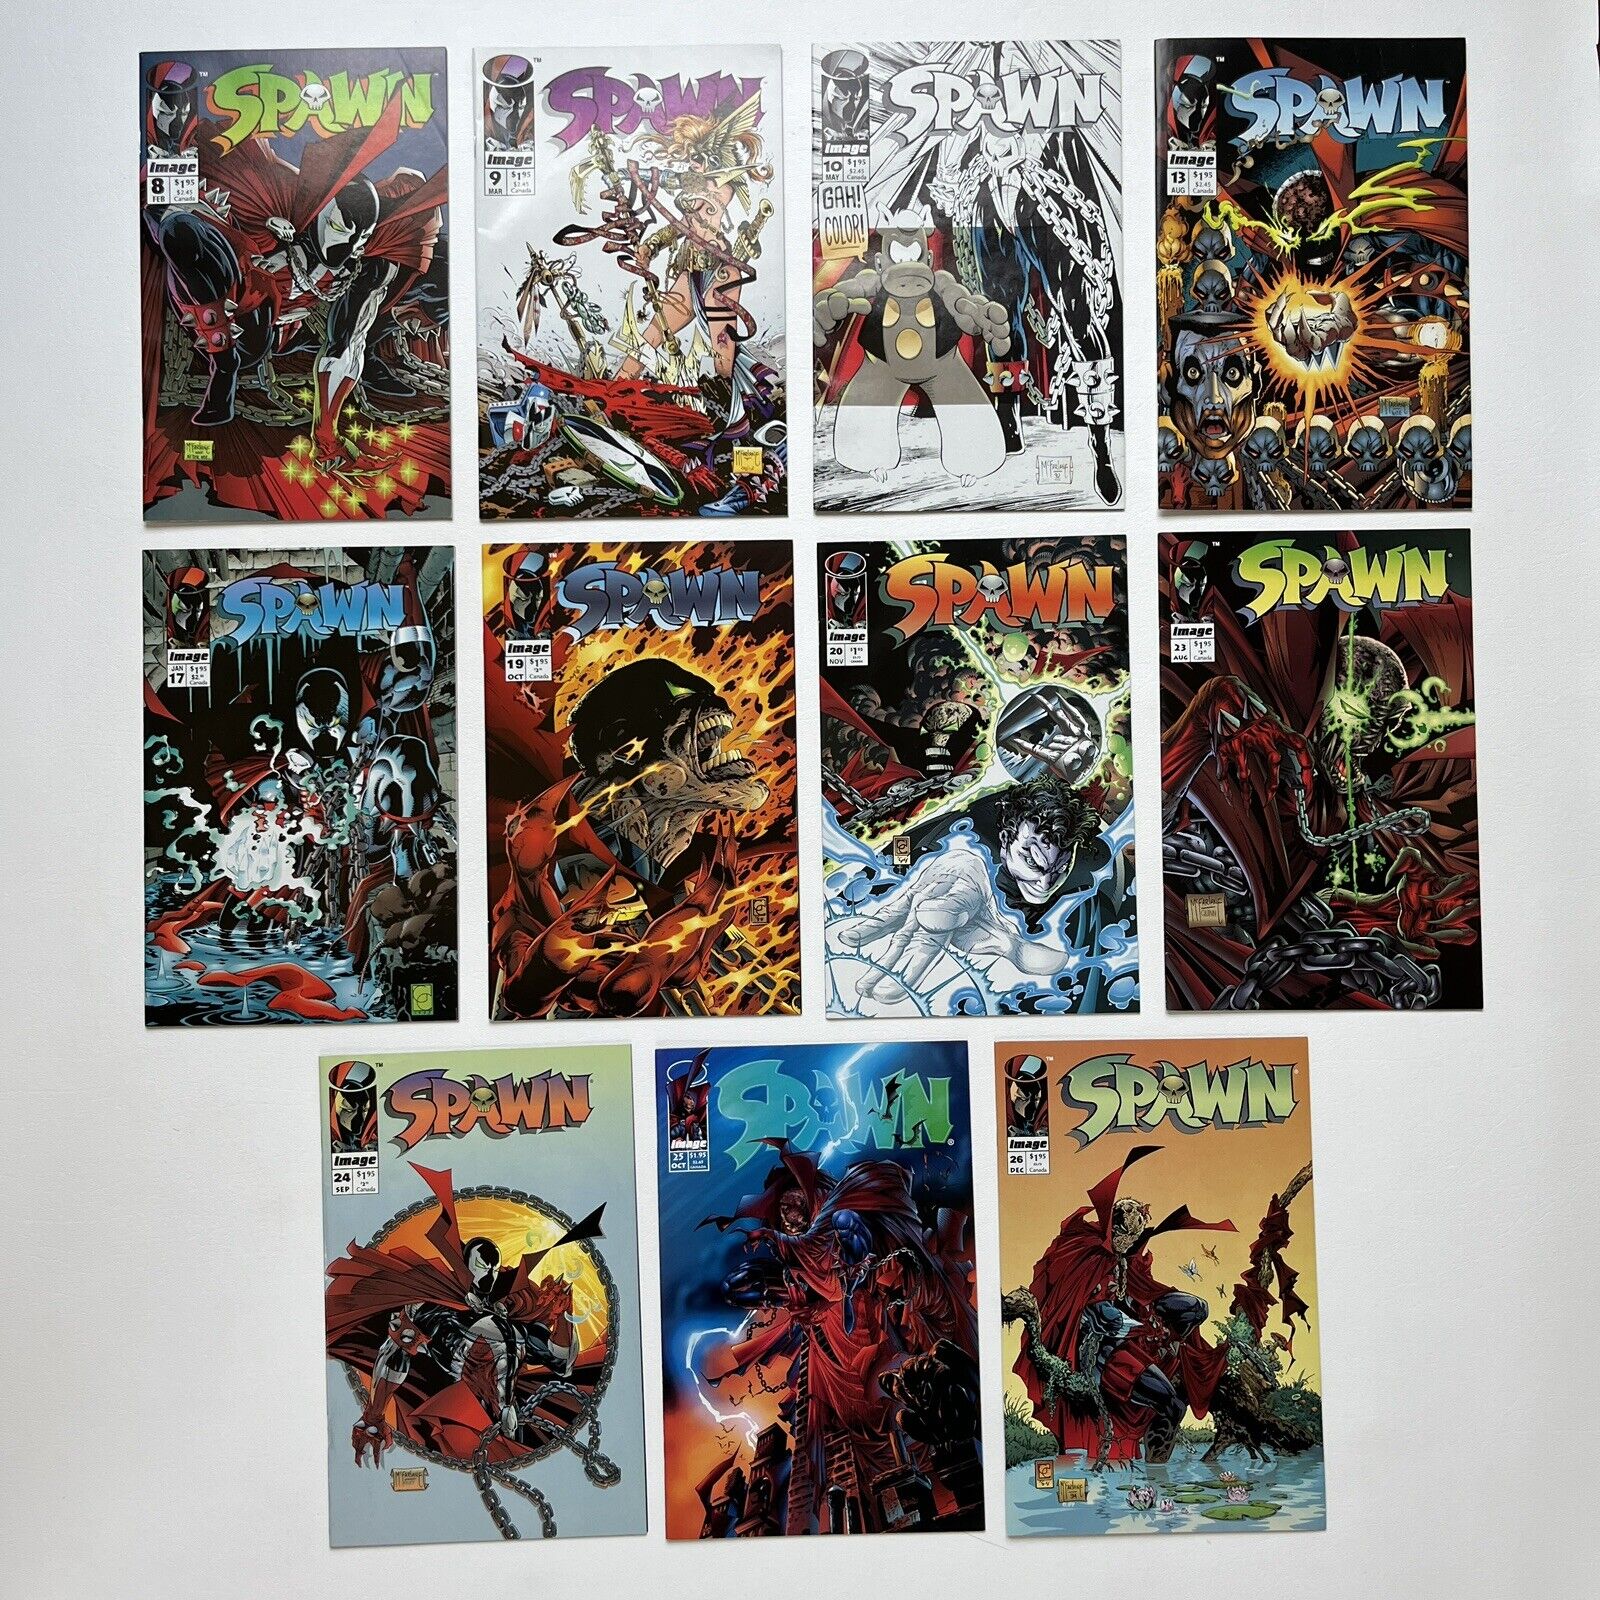 Spawn #8, 9, 10, 13, 17, 19, 20, 23, 24, 25, 26 Early Issues Comics VF or Better